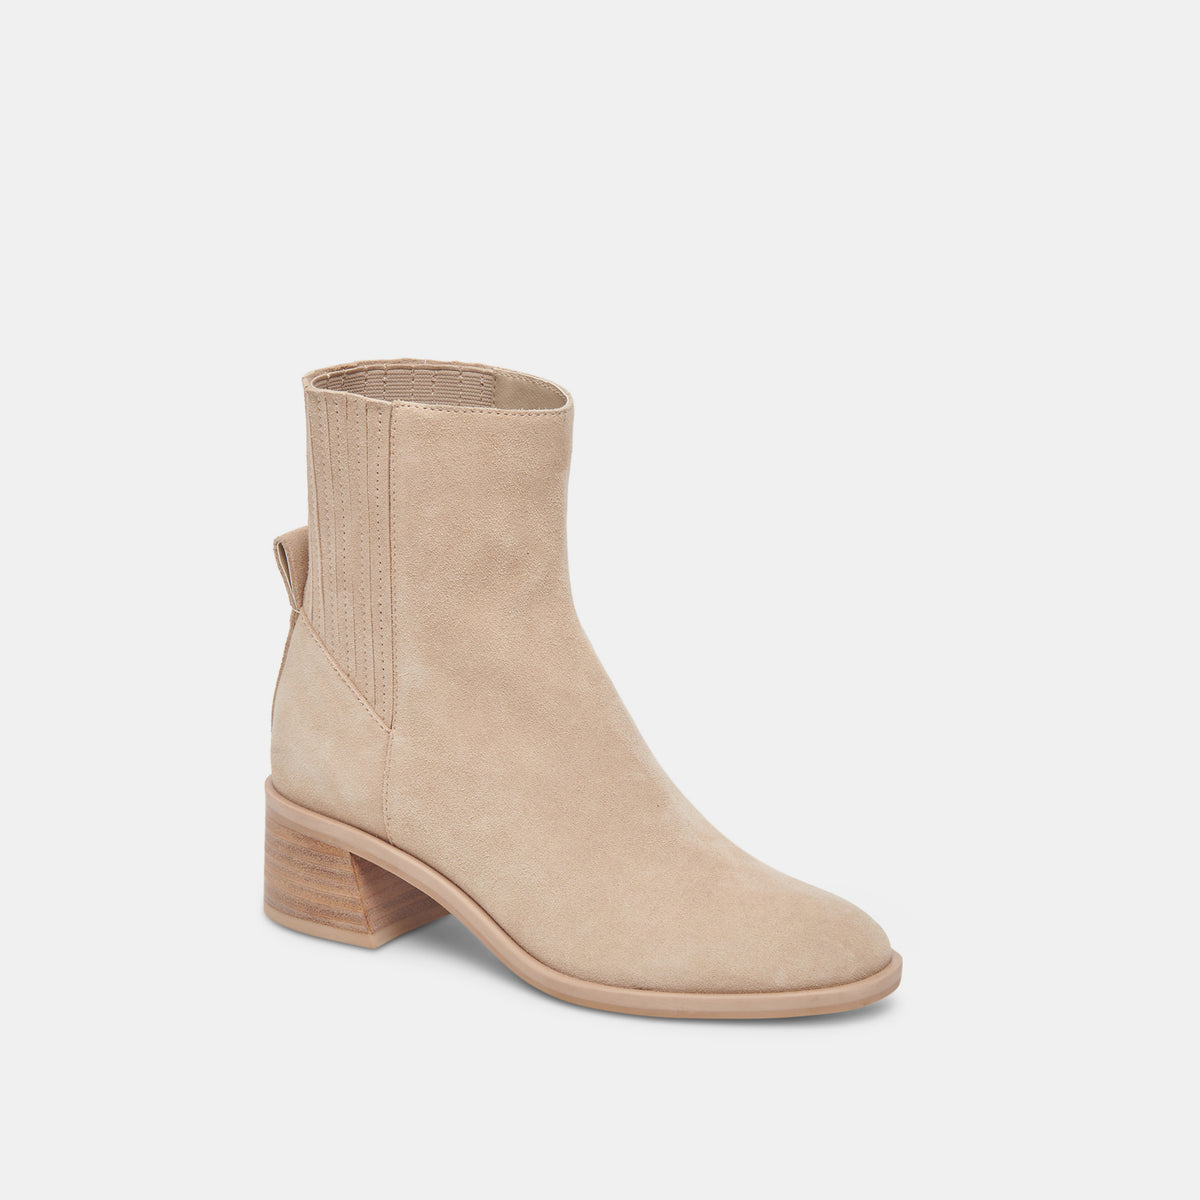 LINNY H2O WIDE BOOTS DUNE SUEDE – Dolce Vita